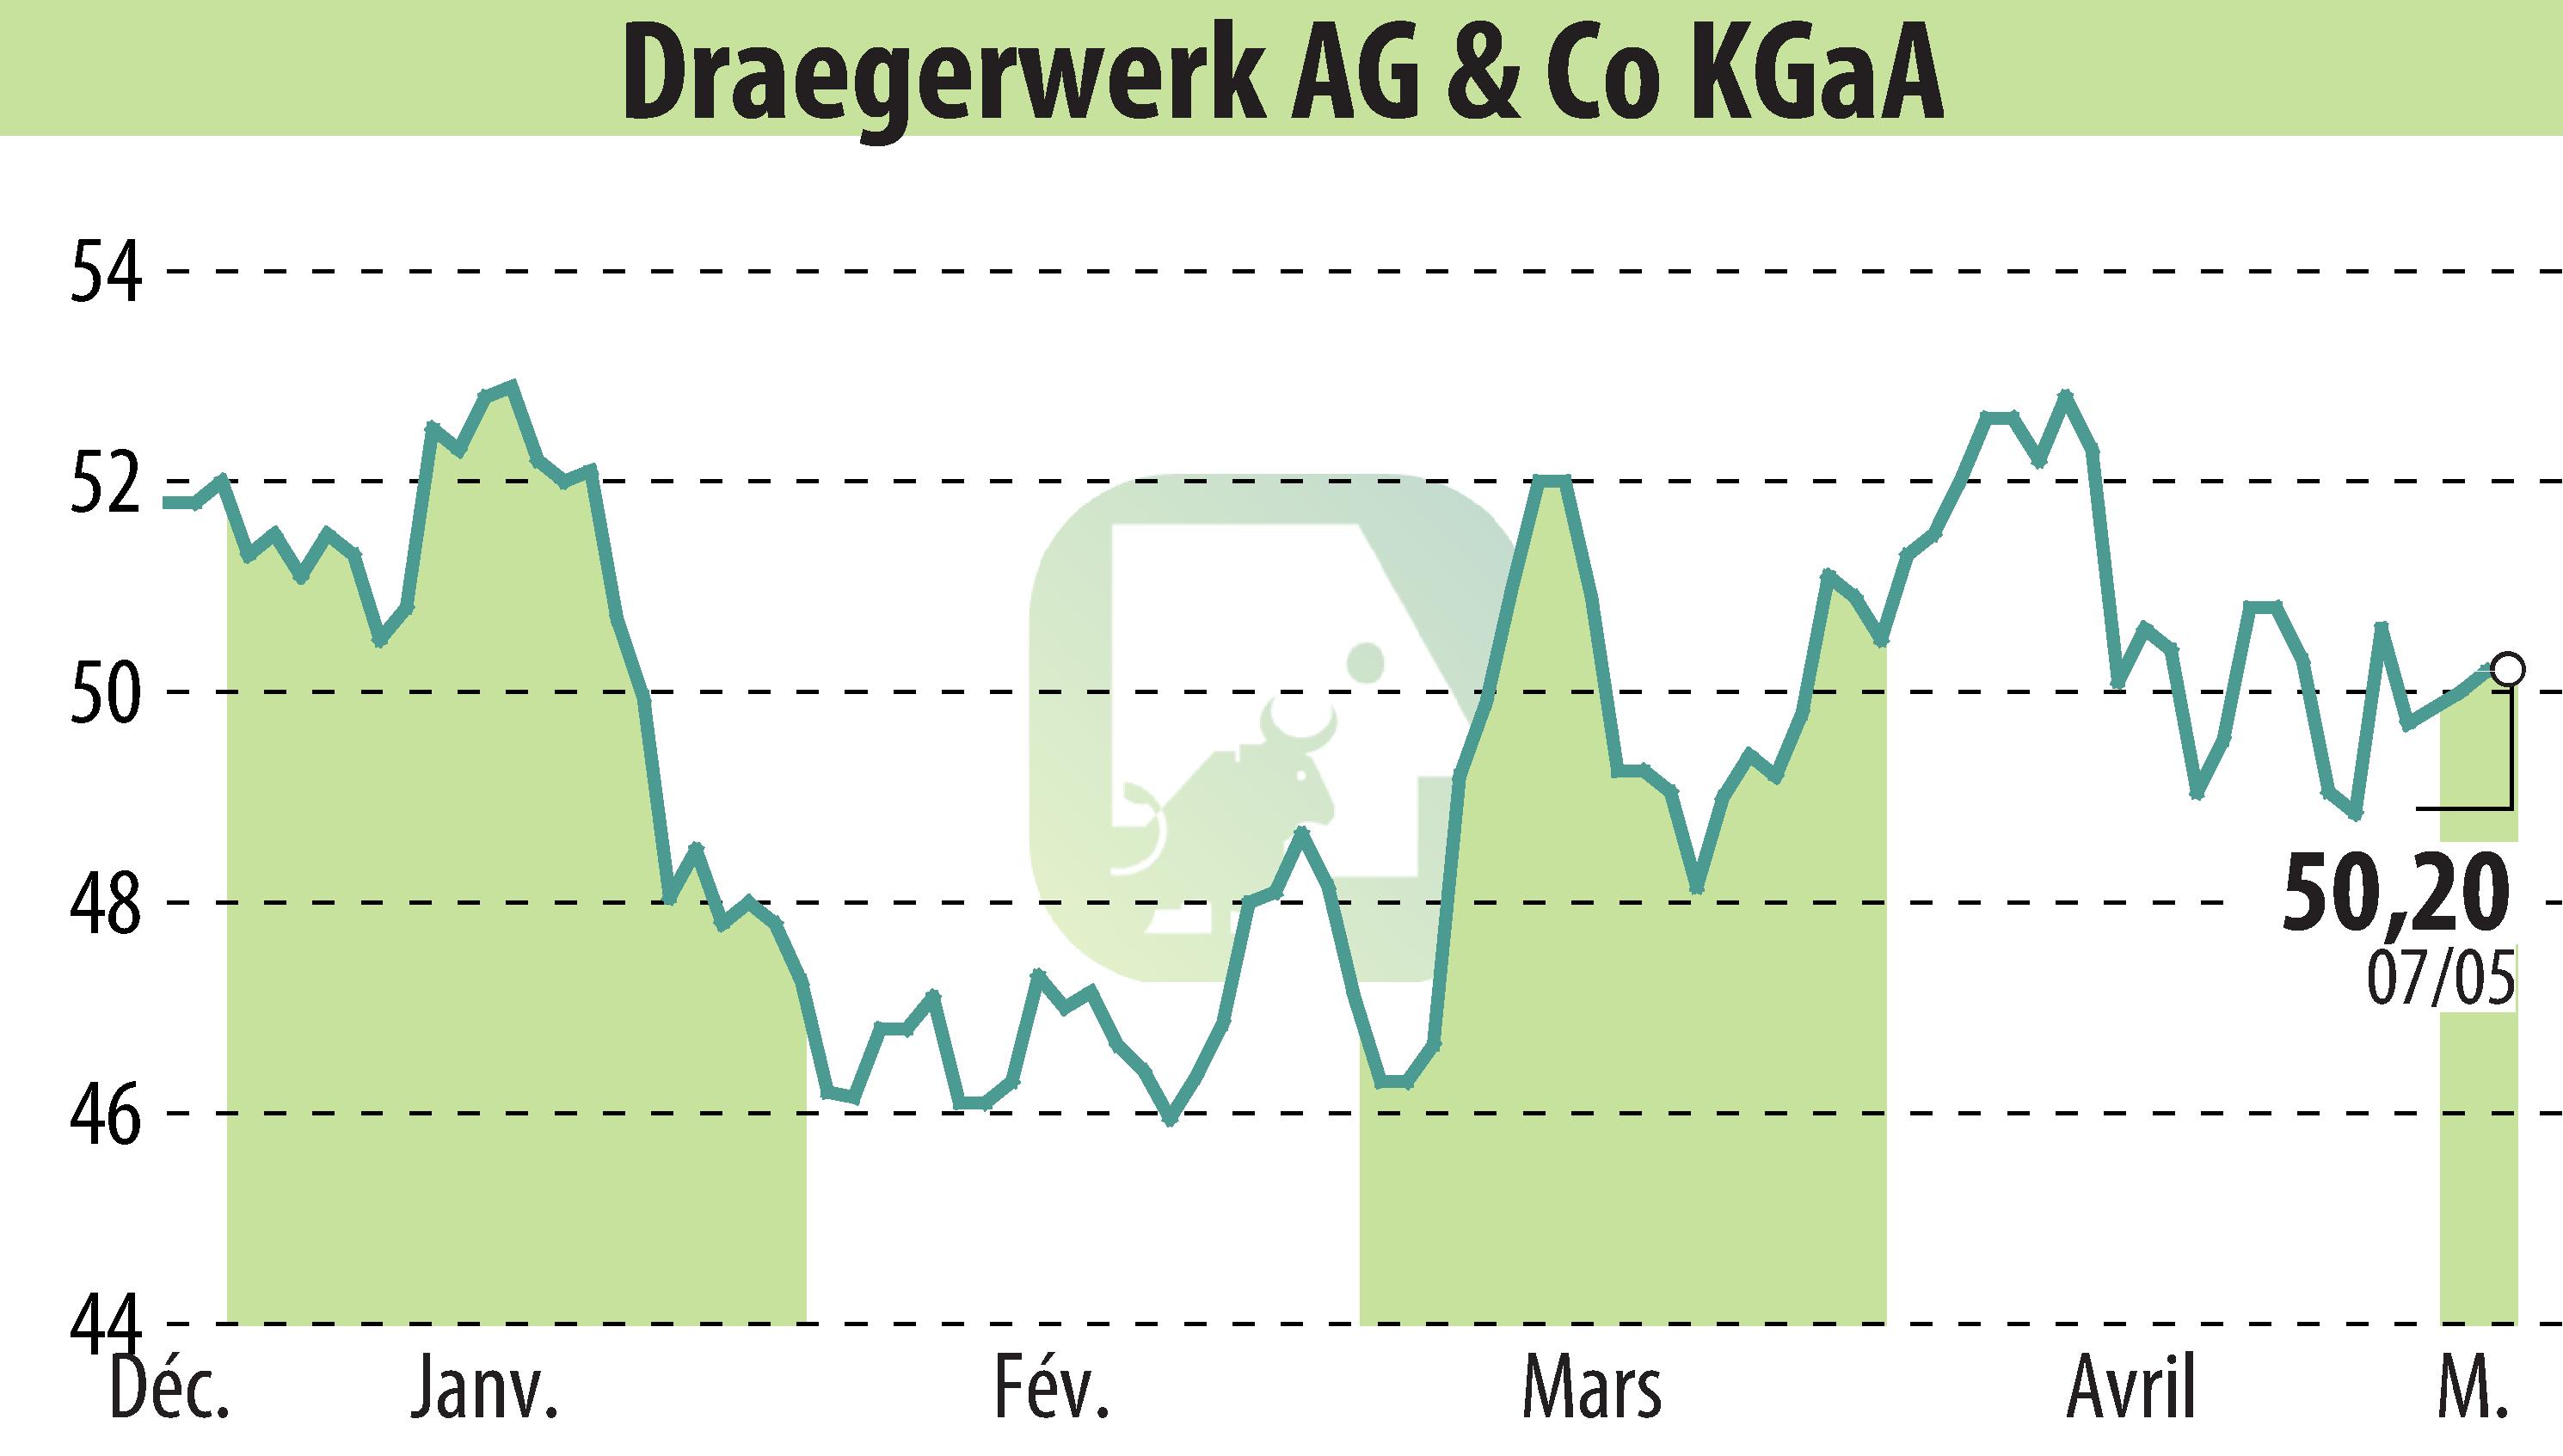 Stock price chart of Drägerwerk AG & Co. KGaA (EBR:DRW3) showing fluctuations.